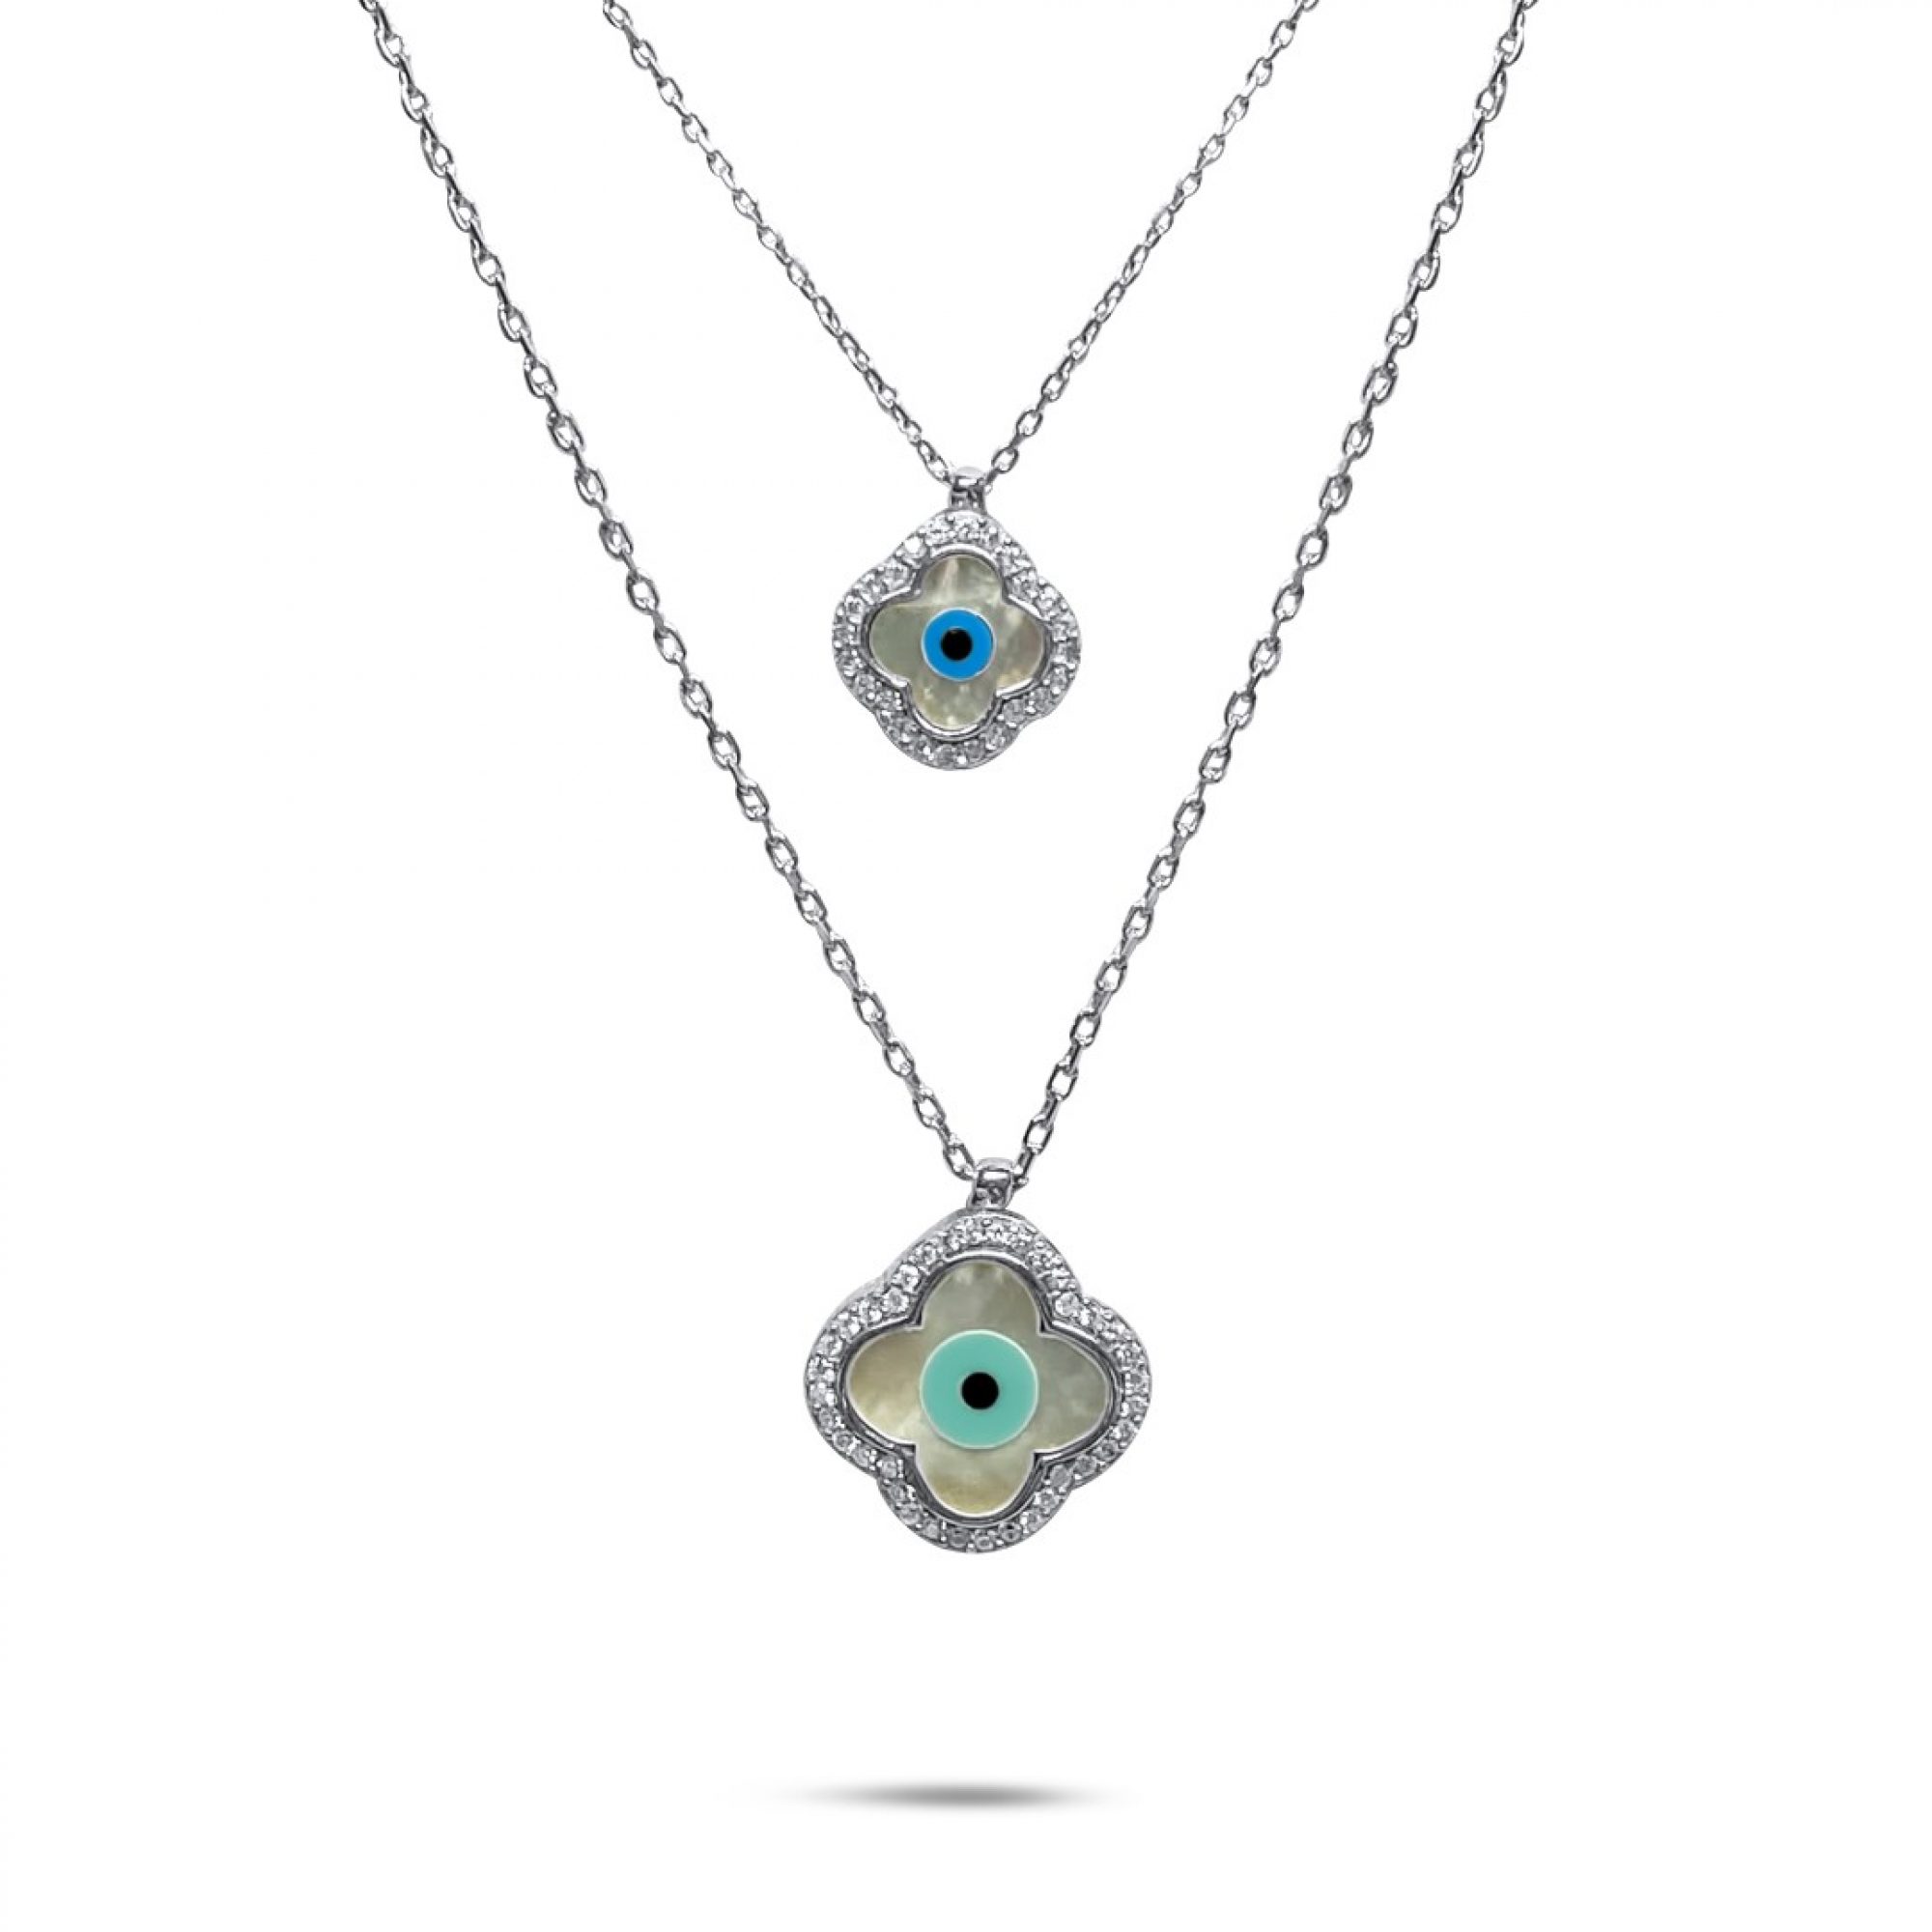 Double eye necklace with mother of pearl and zircon stones